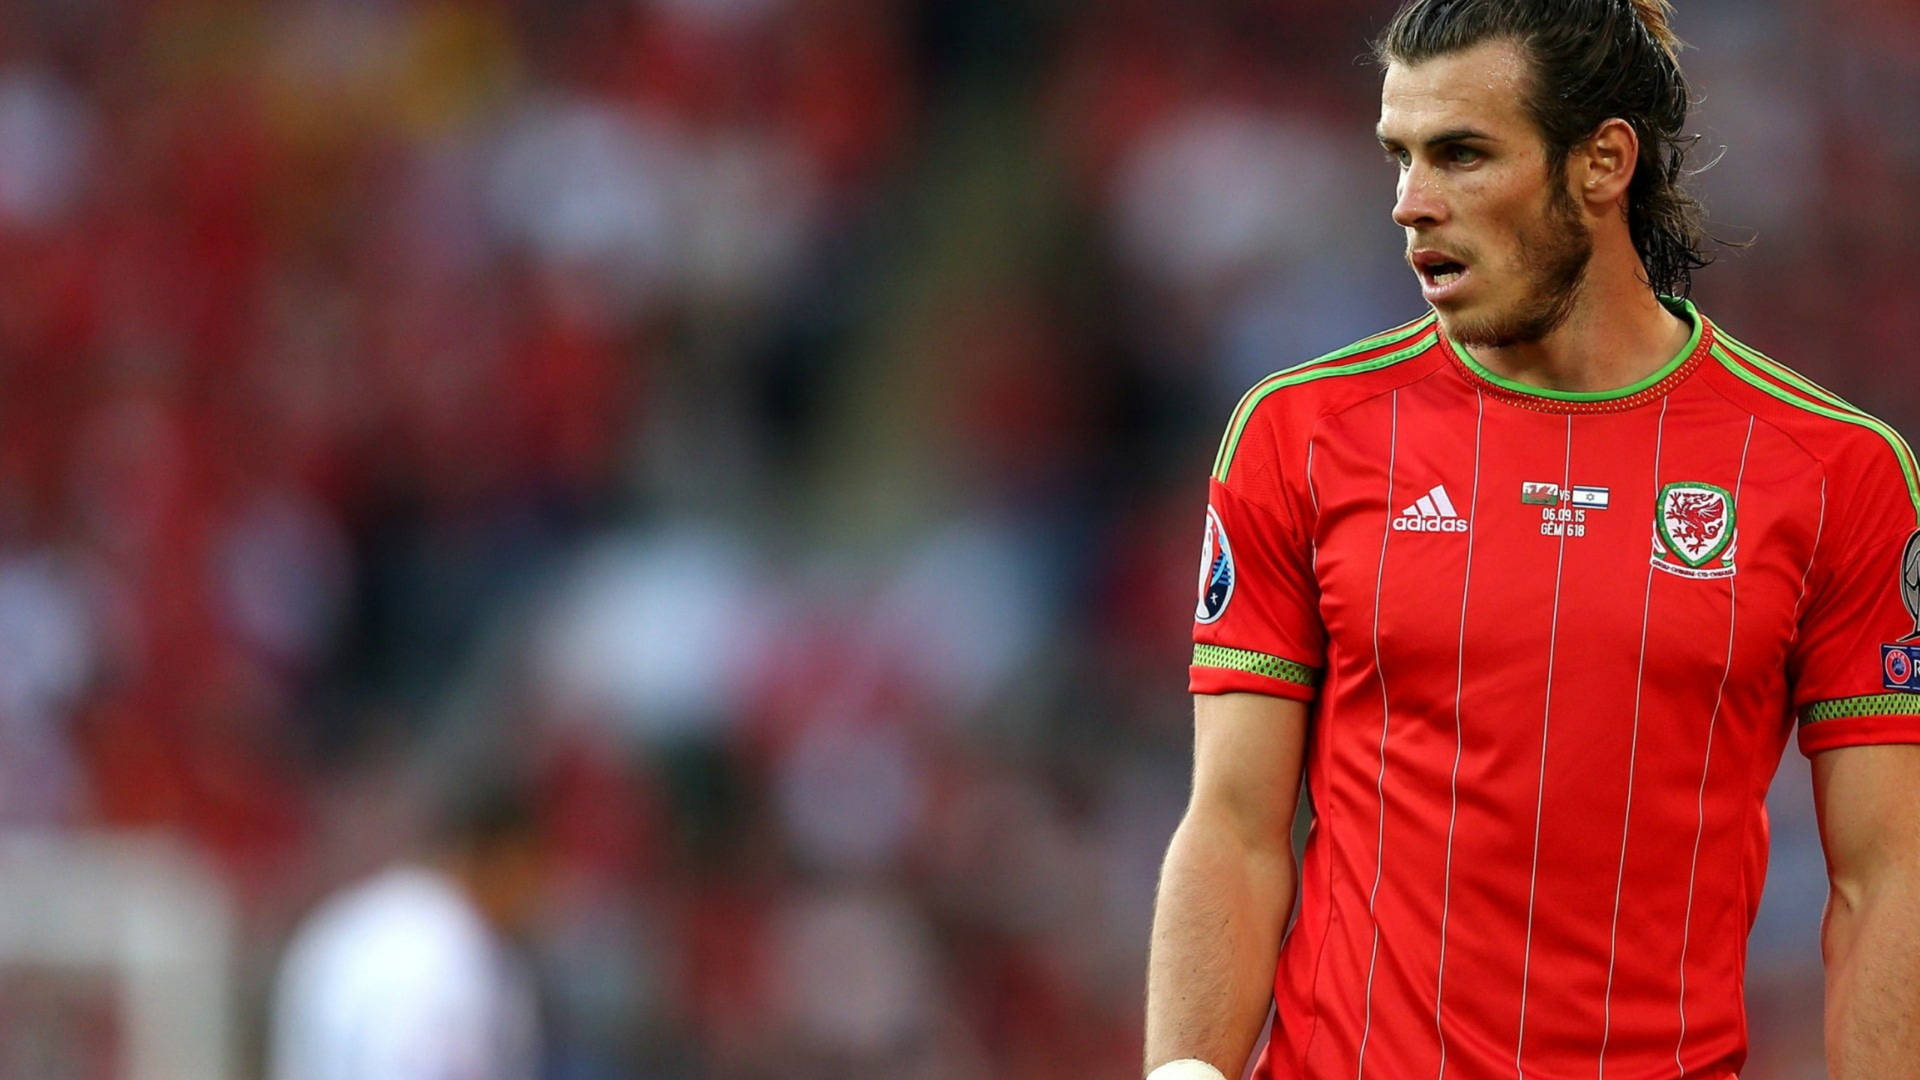 Gareth Bale In Red